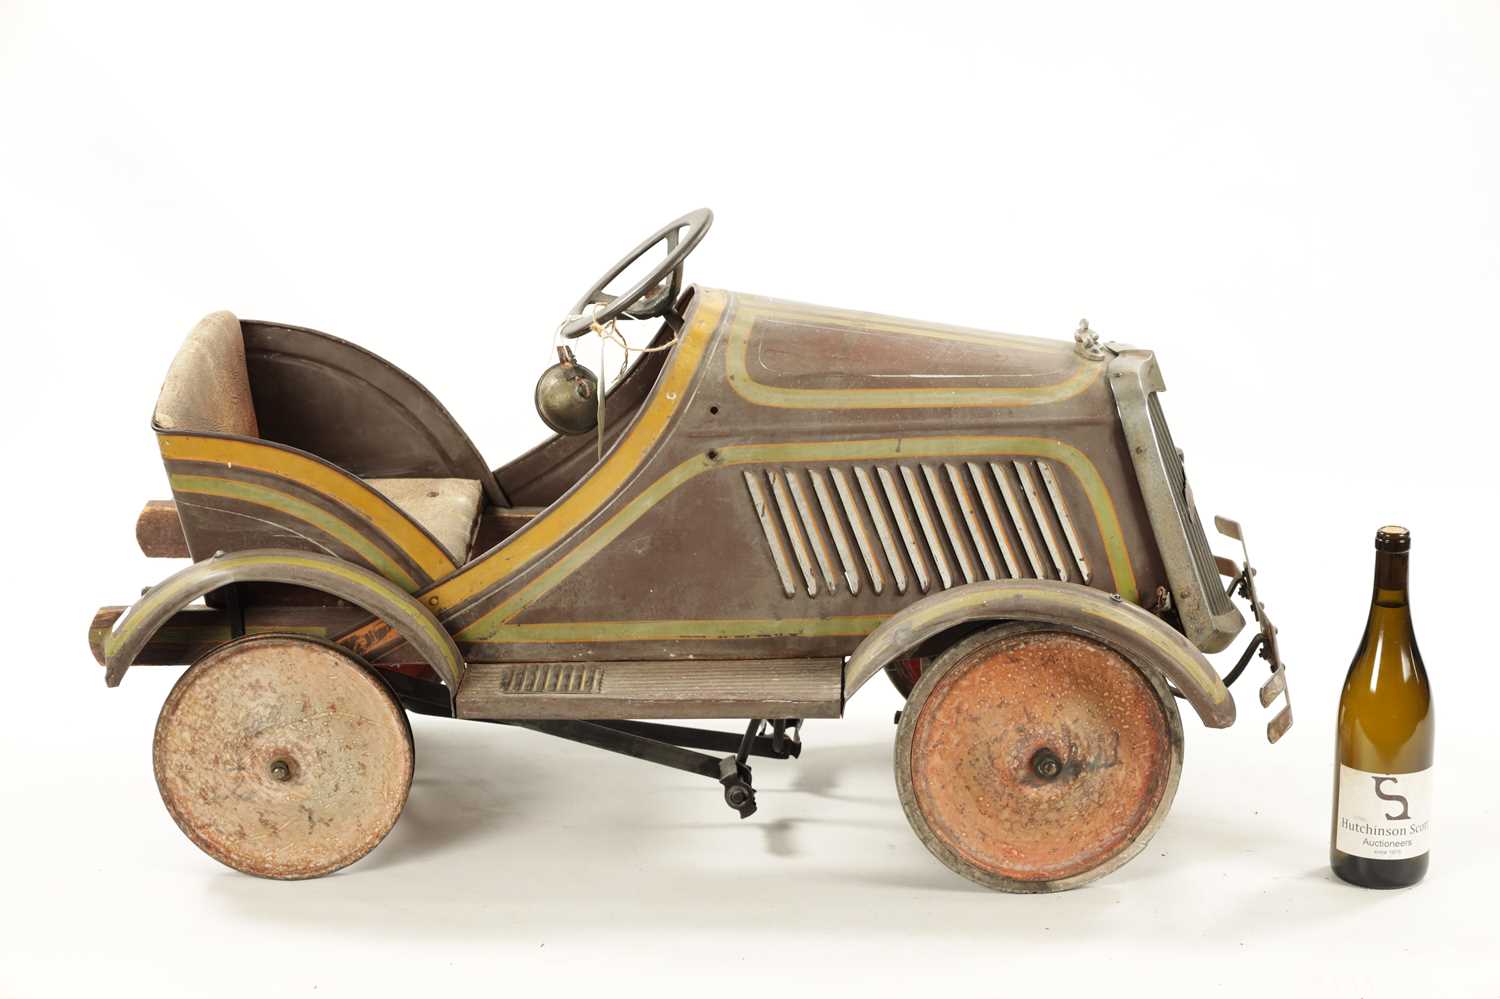 A RARE VINTAGE GERMAN CHILD’S ROADSTER PEDAL CAR CIRCA 1936 - Image 6 of 9